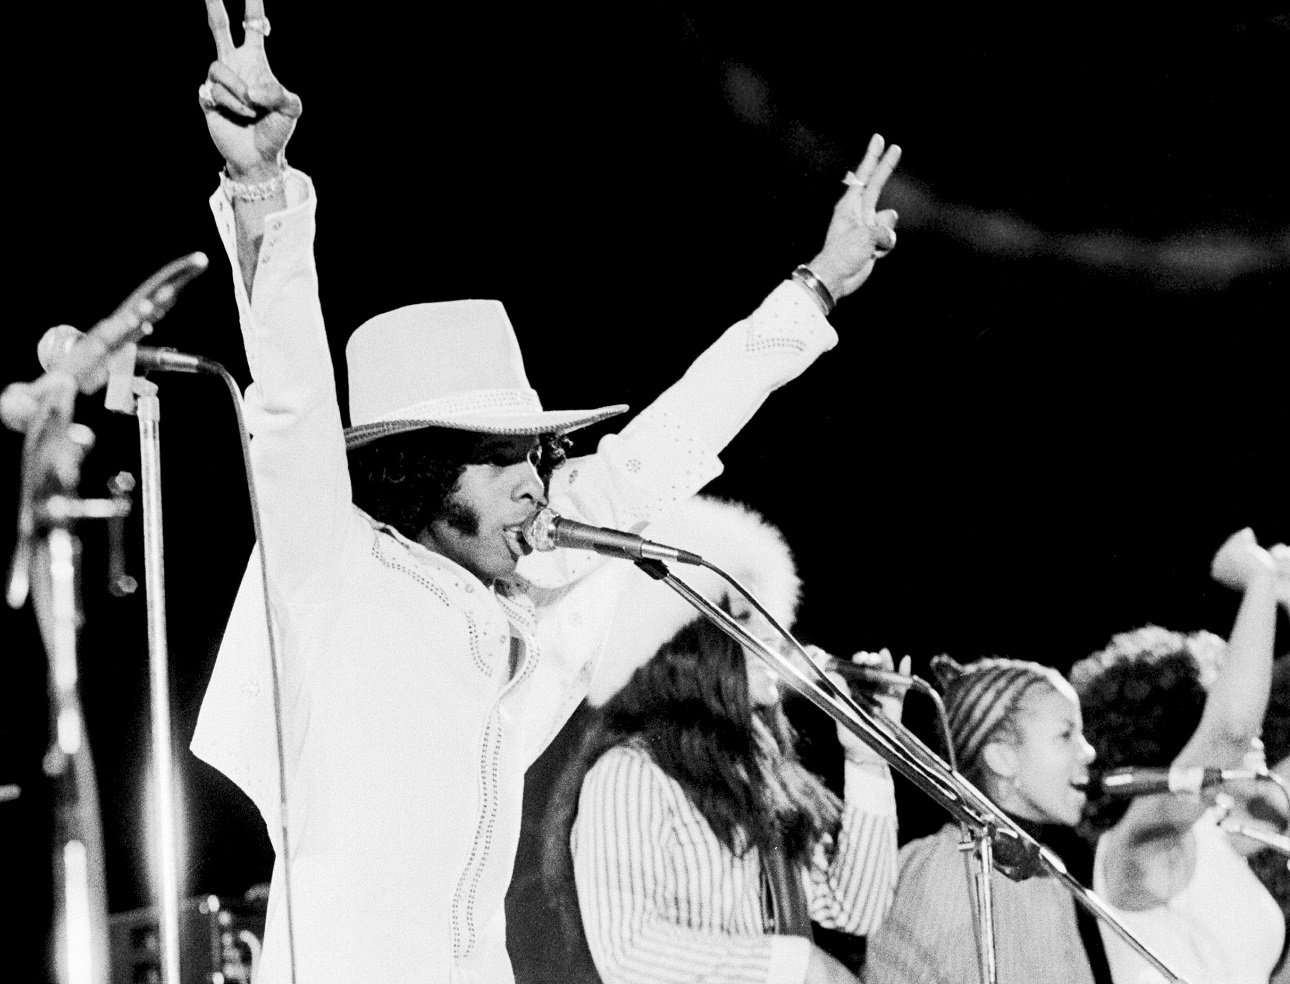 Sly Stone has both arms raised and flashes the peace sign as he sings into a microphone at a concert